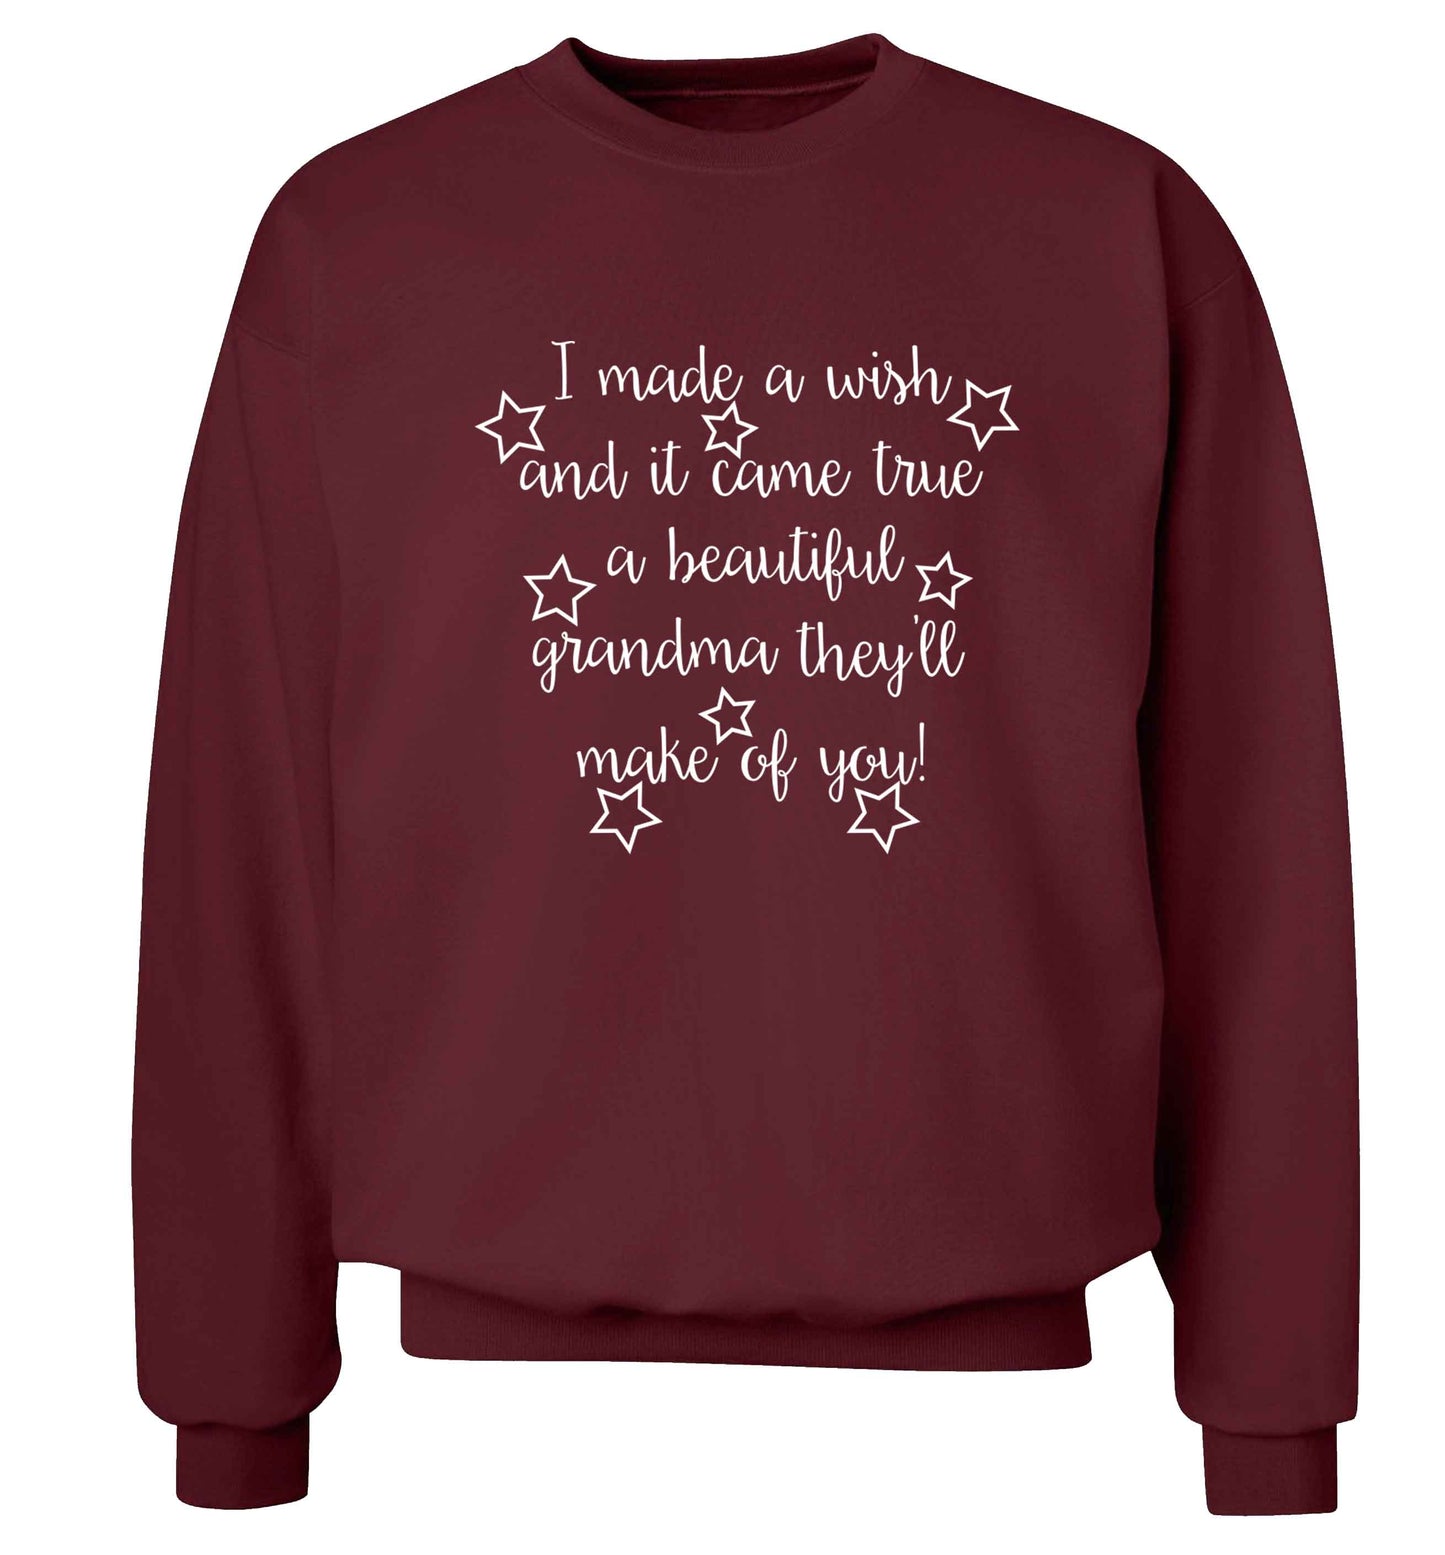 I made a wish and it came true a beautiful grandma they'll make of you! Adult's unisex maroon Sweater 2XL